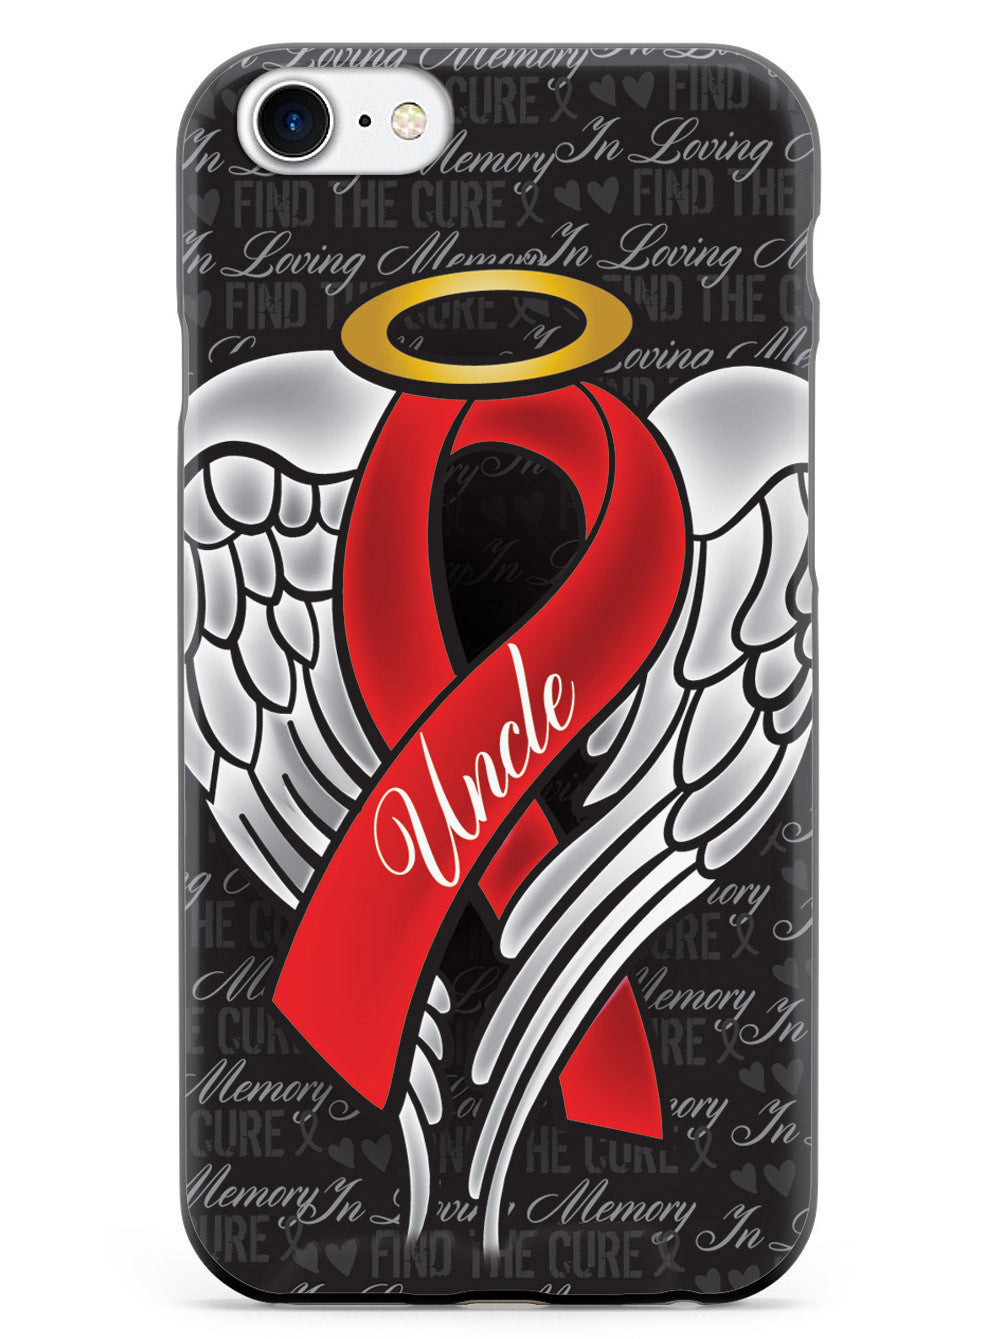 In Loving Memory of My Uncle - Red Ribbon Case